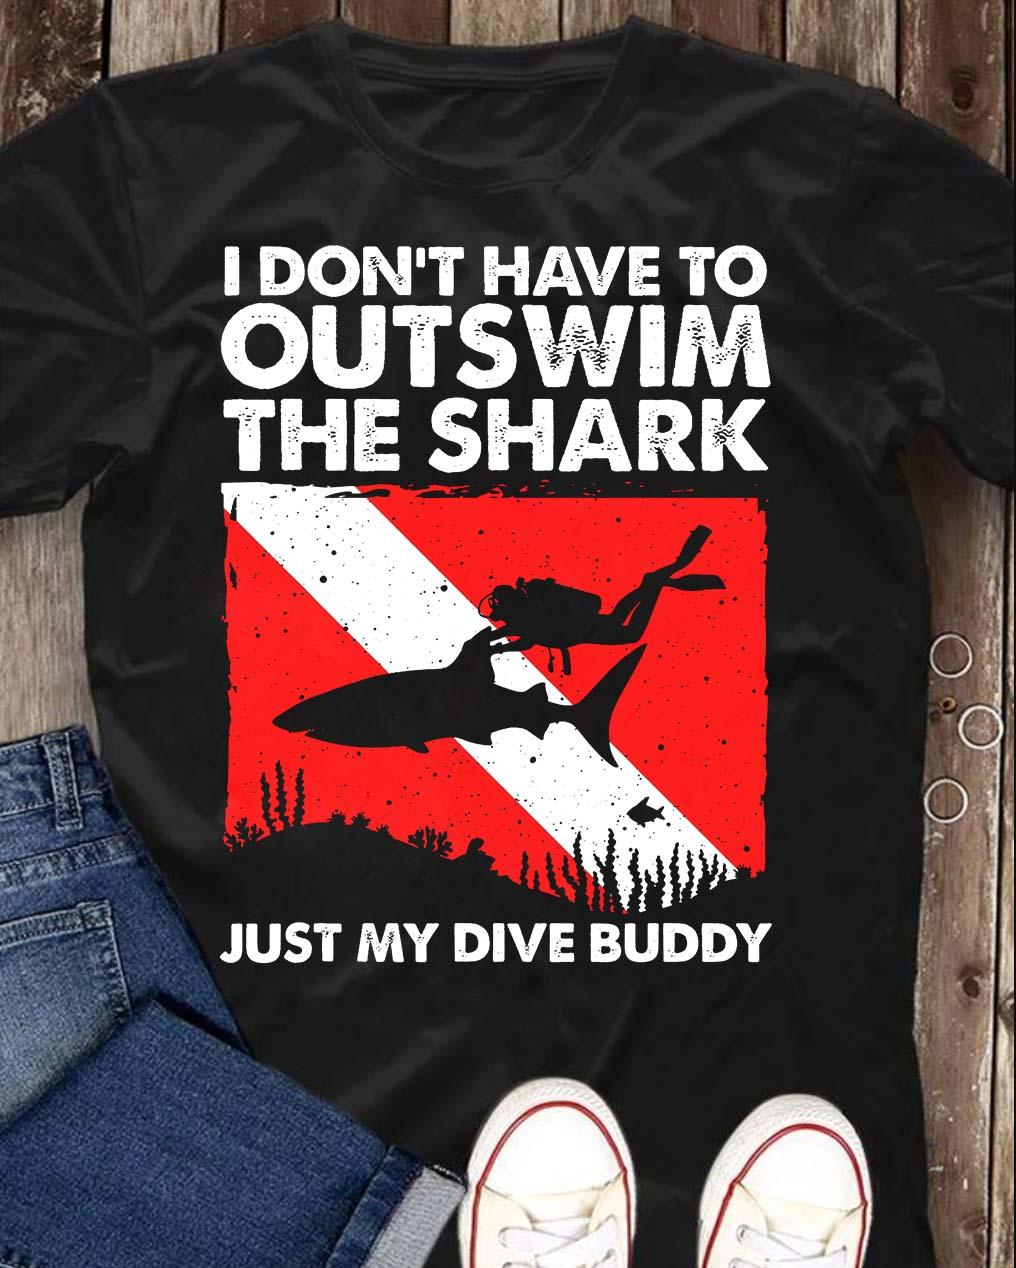 Scuba Diver And The Shark - I don't have to outswim the shark just my dive buddy